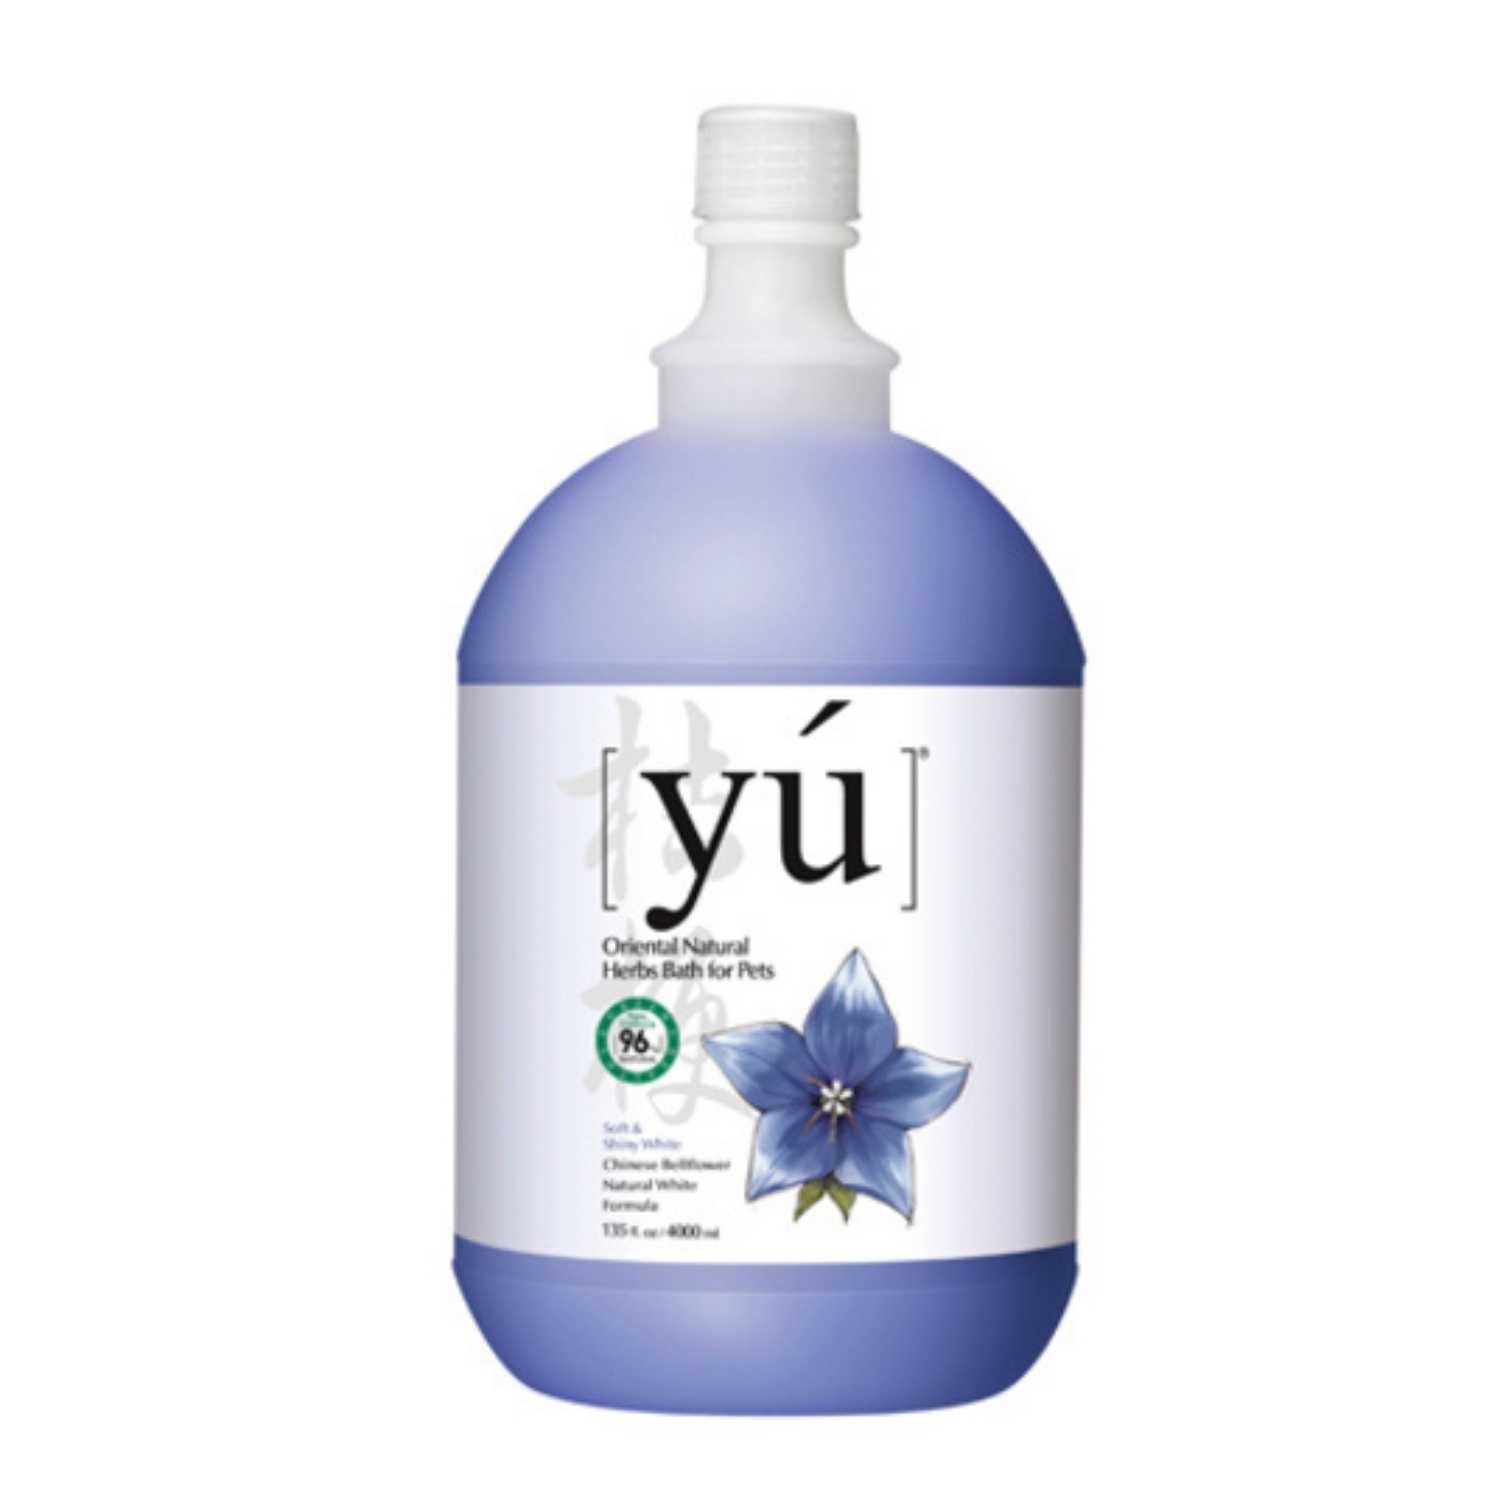 YU - Natural White Formula for Dogs & Cats Bath (2 Sizes)